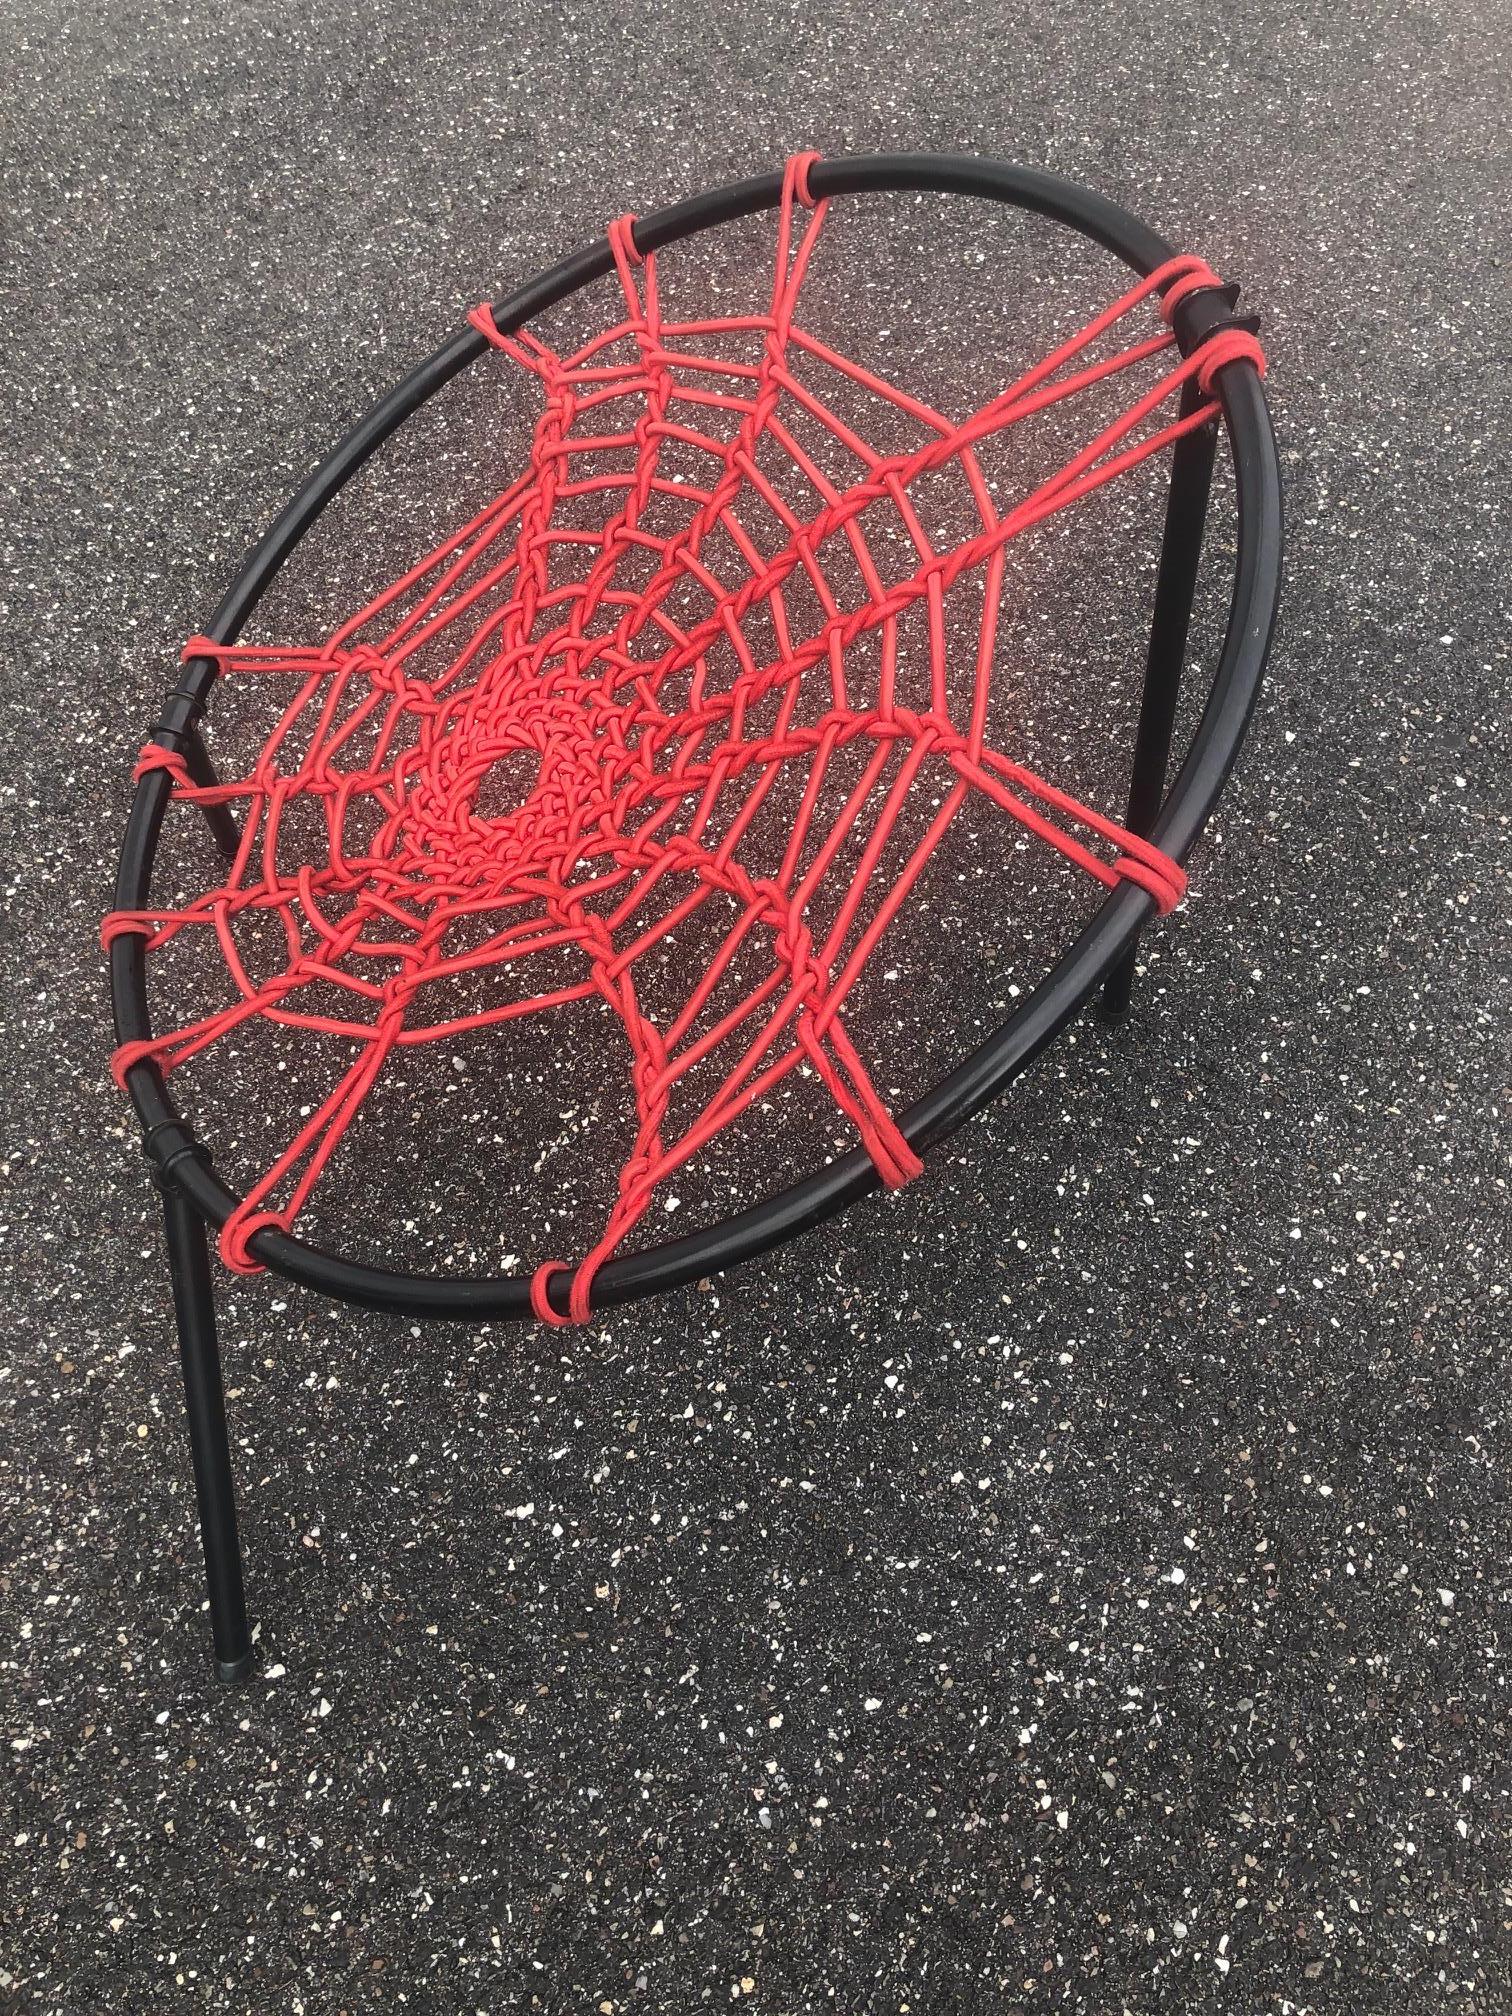 Midcentury Plan O Hoffer Spider Chair / Lounge Patio Chair French, circa 1958 In Good Condition For Sale In Brooklyn, NY